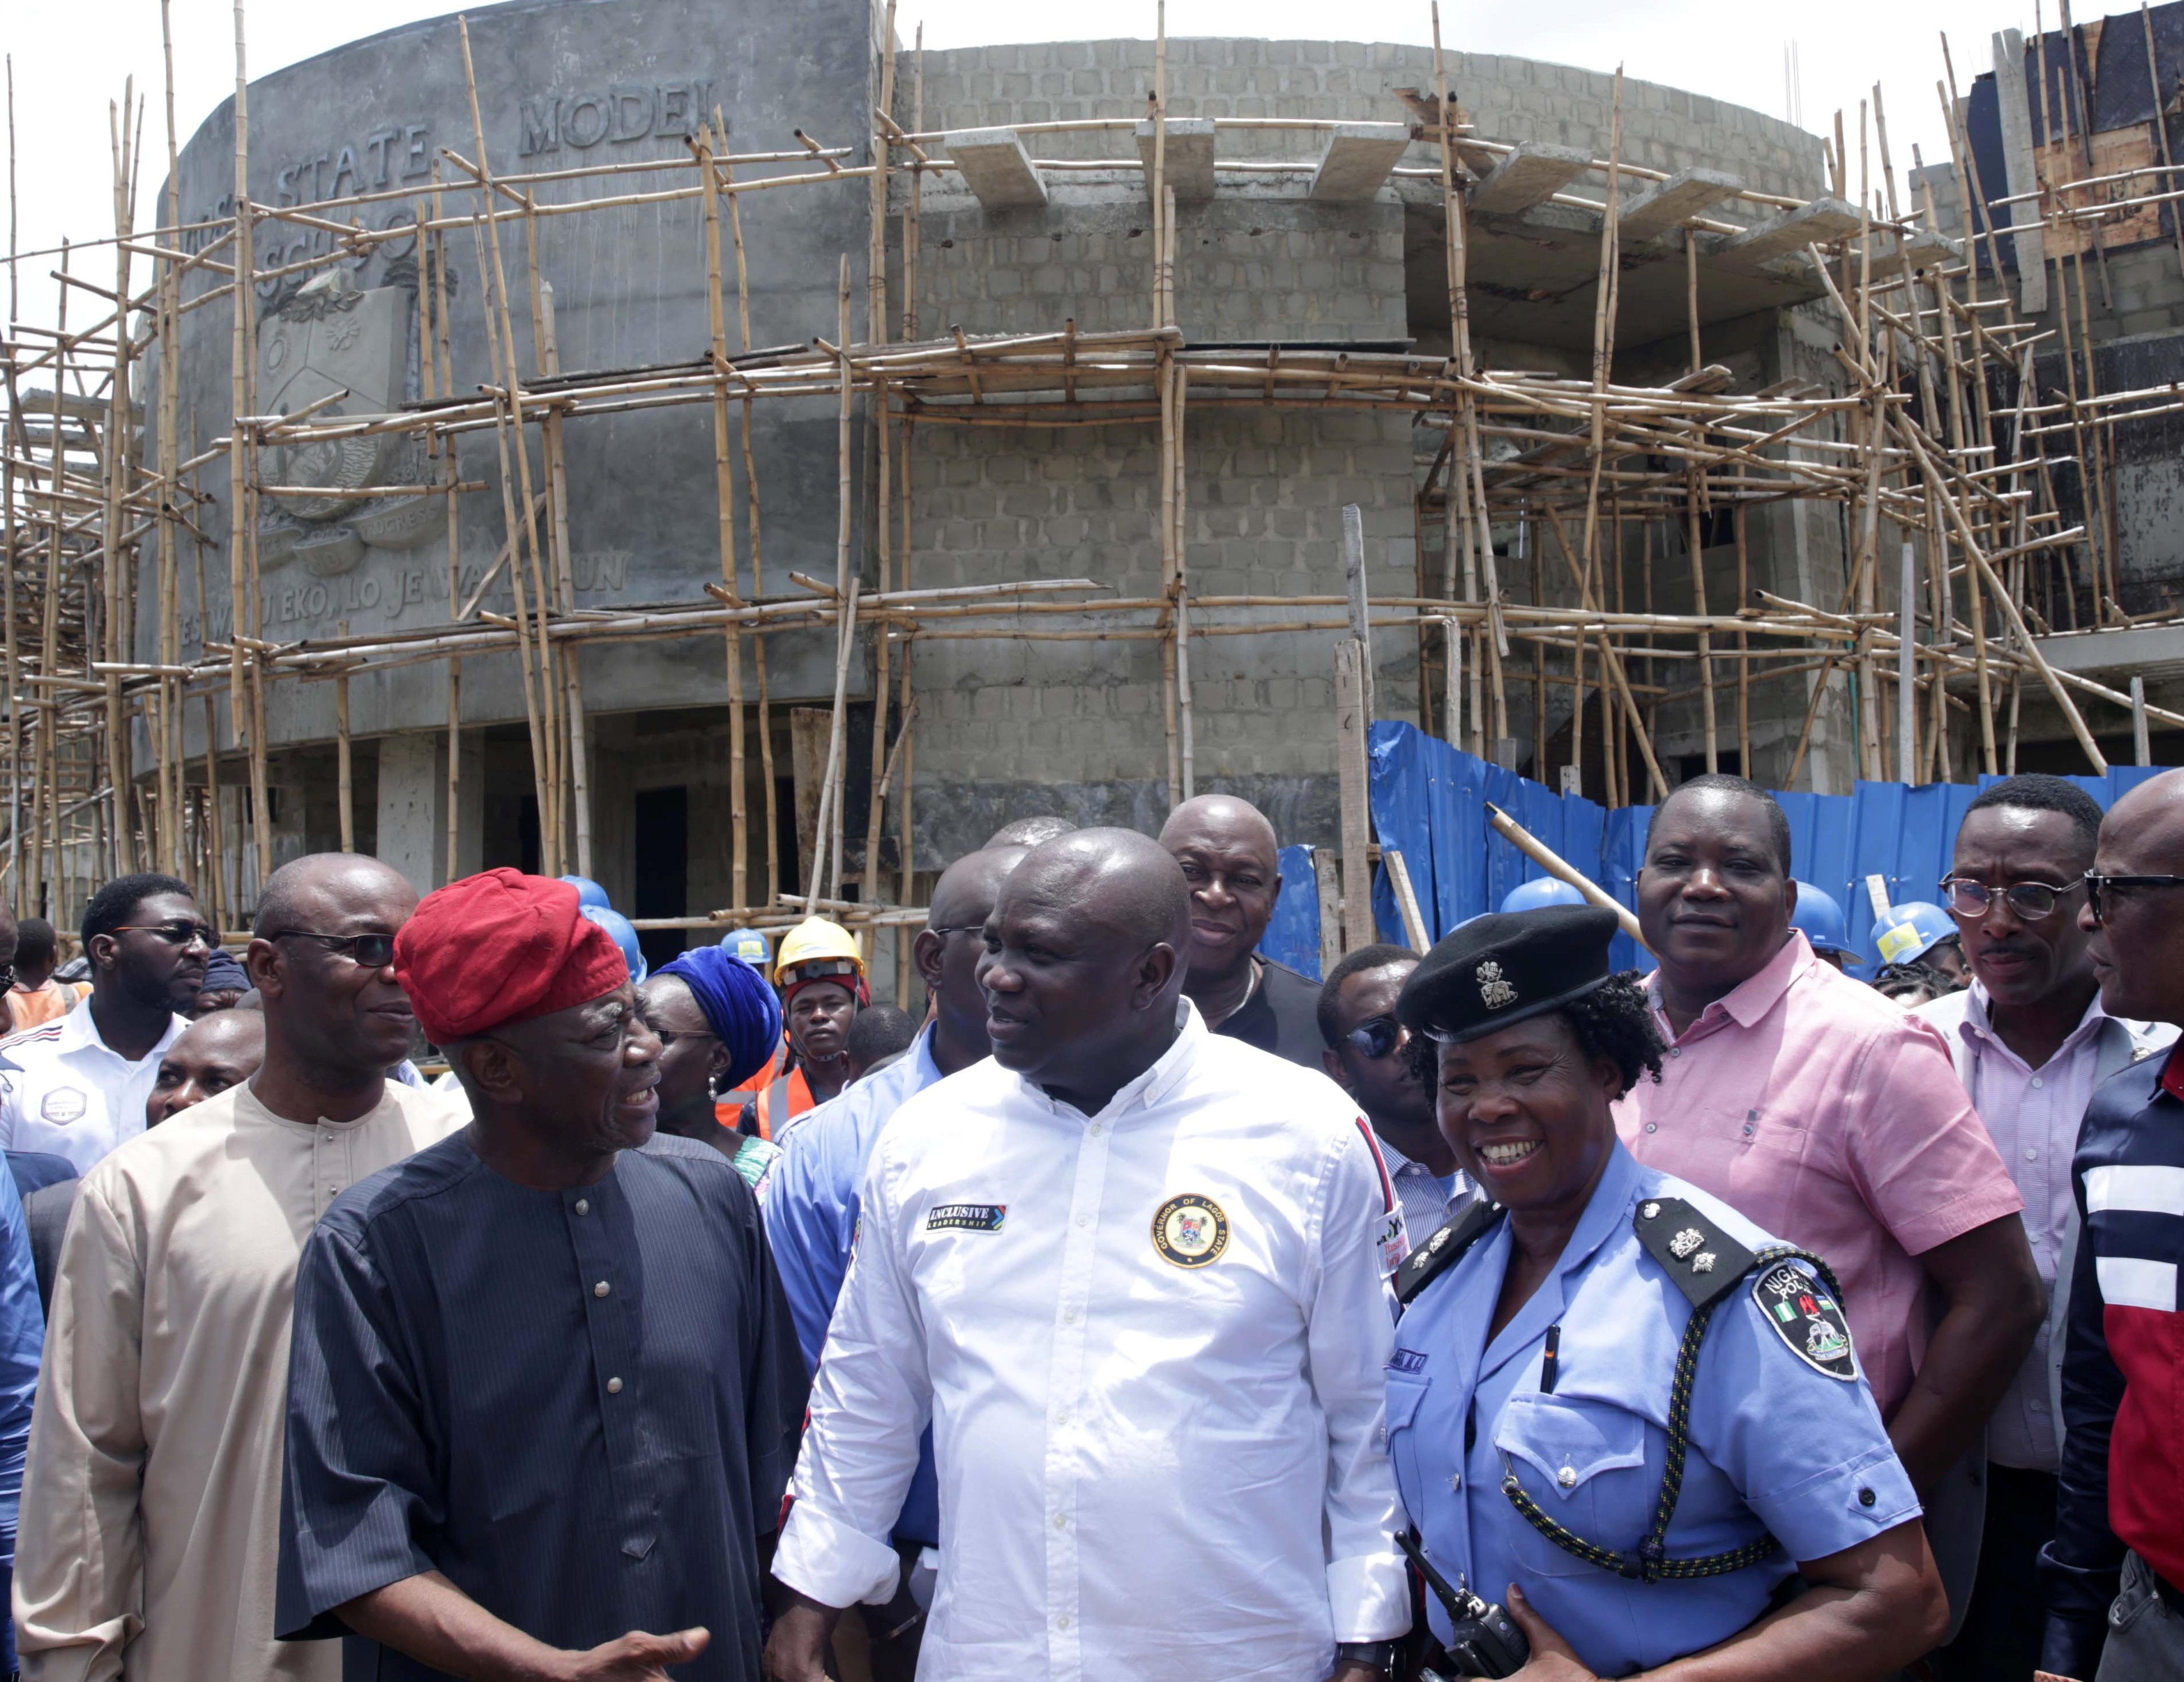 Lagos State Governor, Mr. Akinwunmi Ambode (2nd right), being welcomed by father of Vice-President's wife, Elder Olutayo Soyode (2nd left); Divisional Police Officer, Sabo Police Station, SP, Mary Ubangha (right) and others during the Governor’s inspection of the ongoing construction of Lagos State Model College, Sabo, Yaba, on Thursday, April 12, 2018.